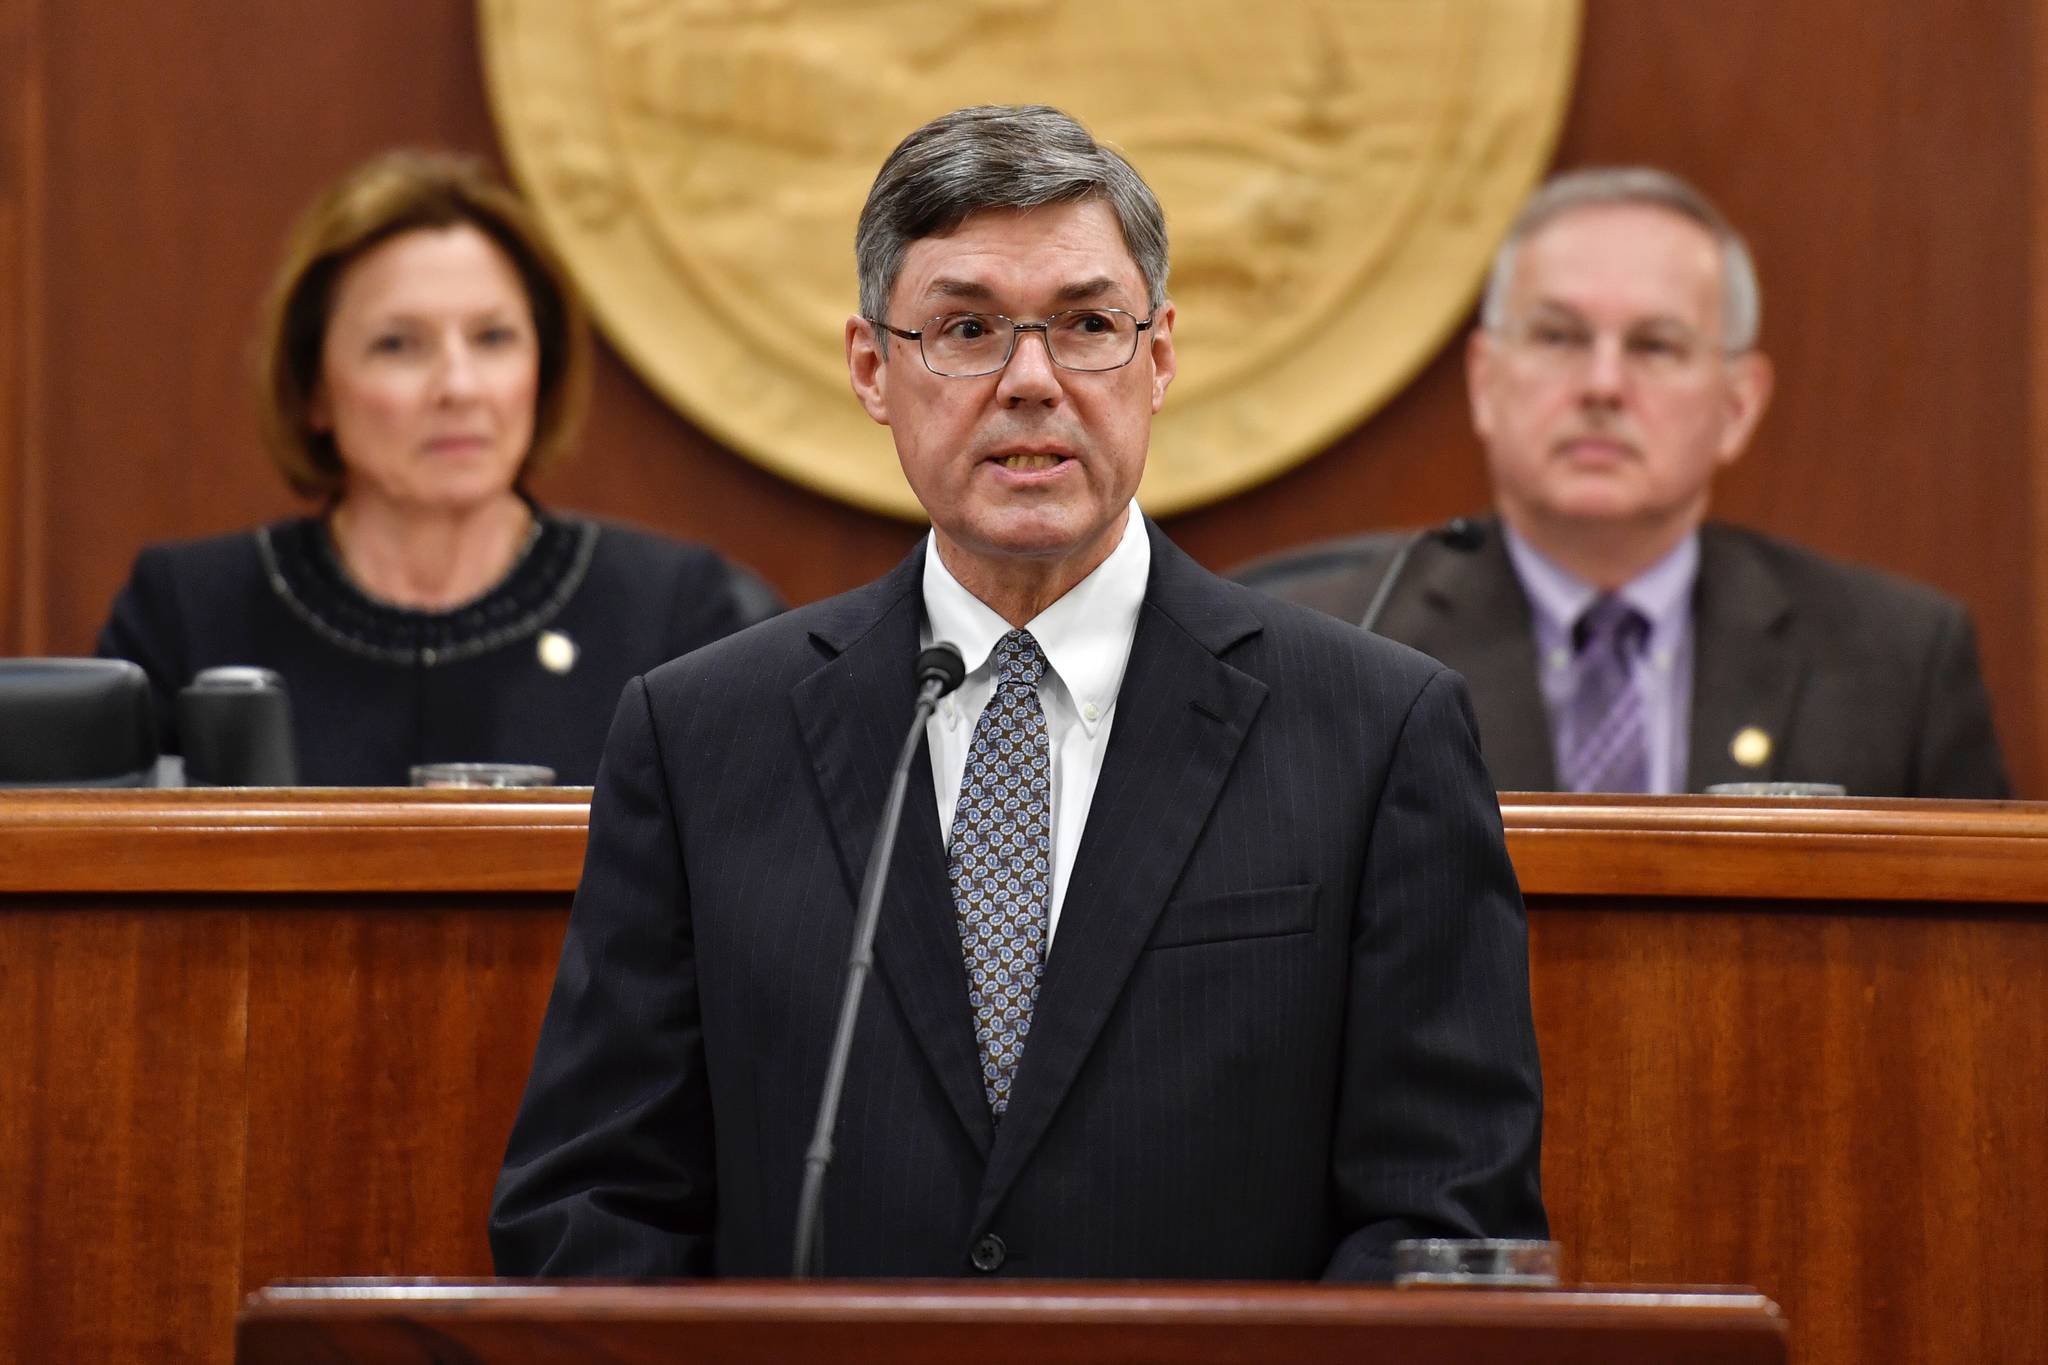 Alaska Supreme Court Chief Justice Joel H. Bolger speaks to a Joint Session of the Alaska Legislature at the Capitol on Wednesday, Feb. 20, 2019. Senate President Cathy Giessel, R-Anchorage, and Speaker of the House Bryce Edgmon, D-Dillingham, listen from the Speaker’s desk in the House of Representatives. (Michael Penn | Juneau Empire)